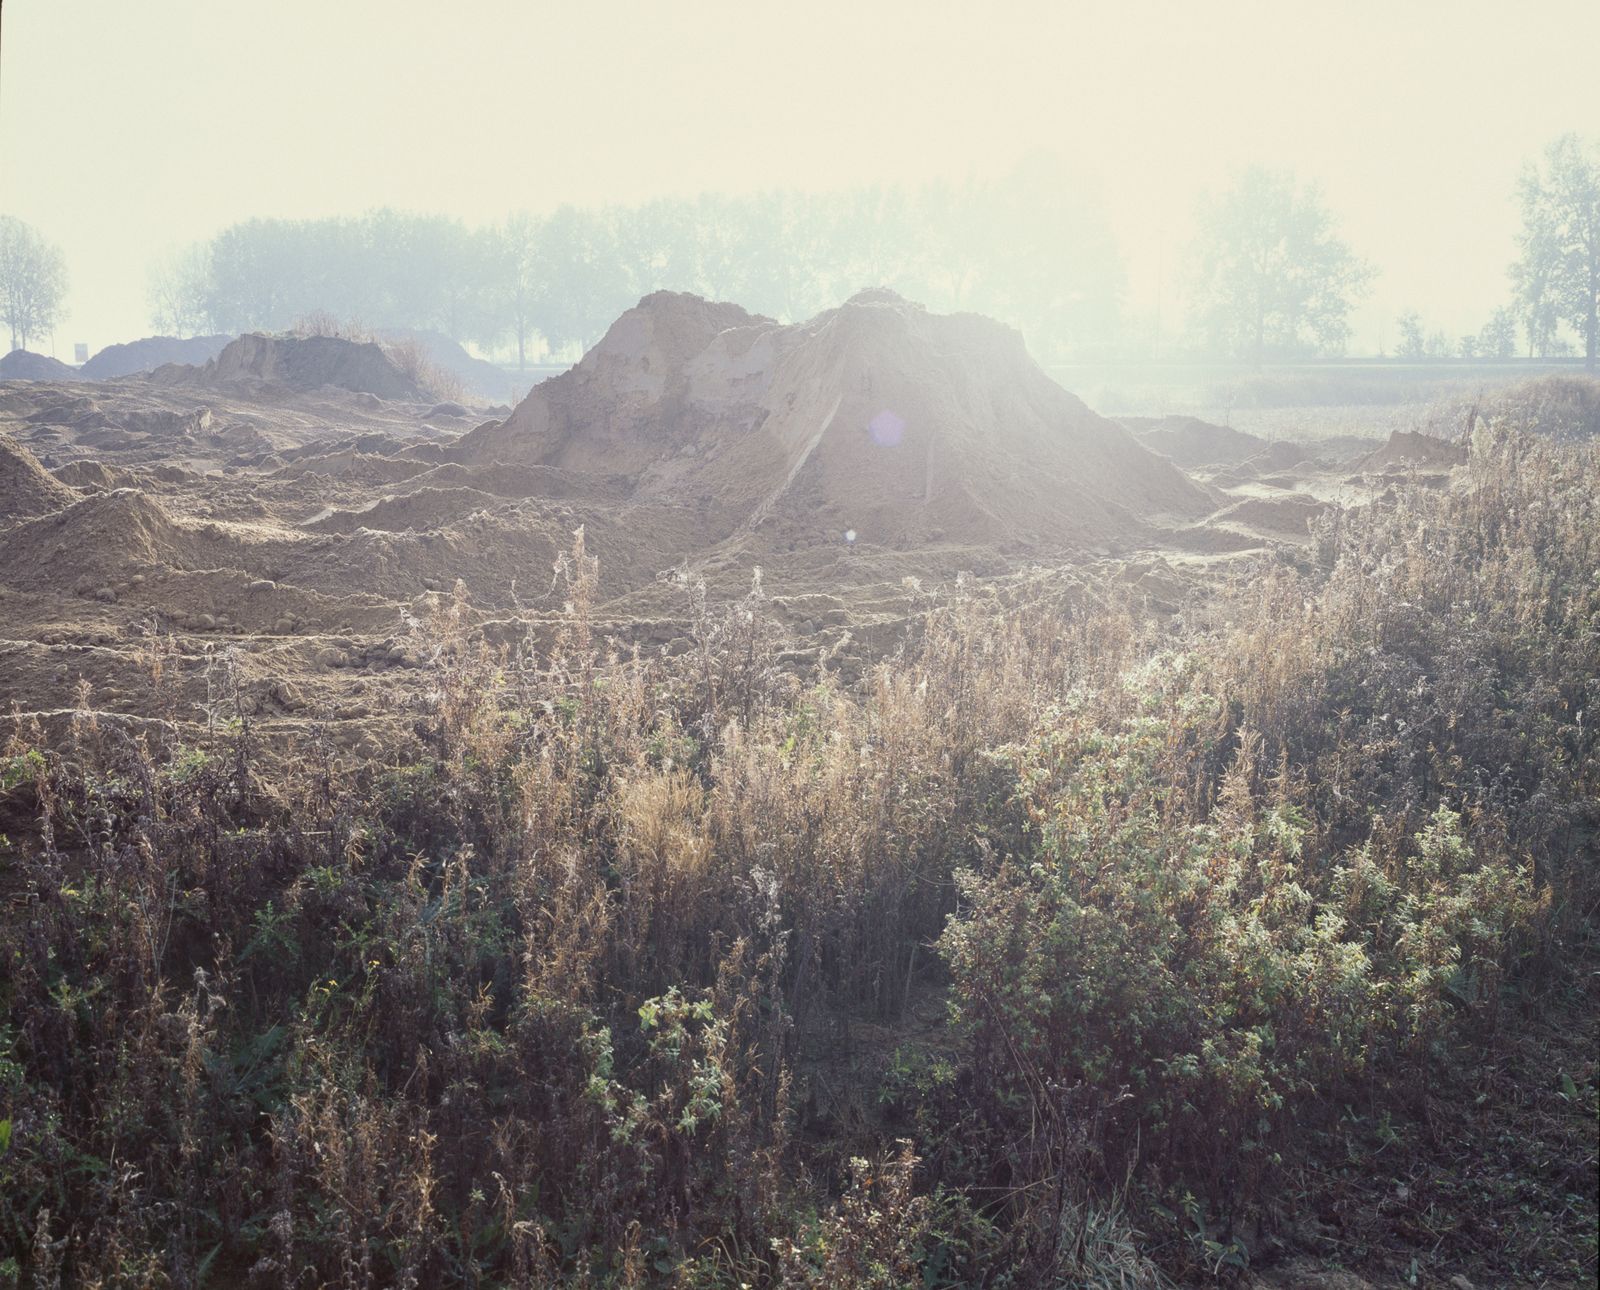 © Isabelle Pateer - A new industrial zone will be constructed on this former agricultural spot